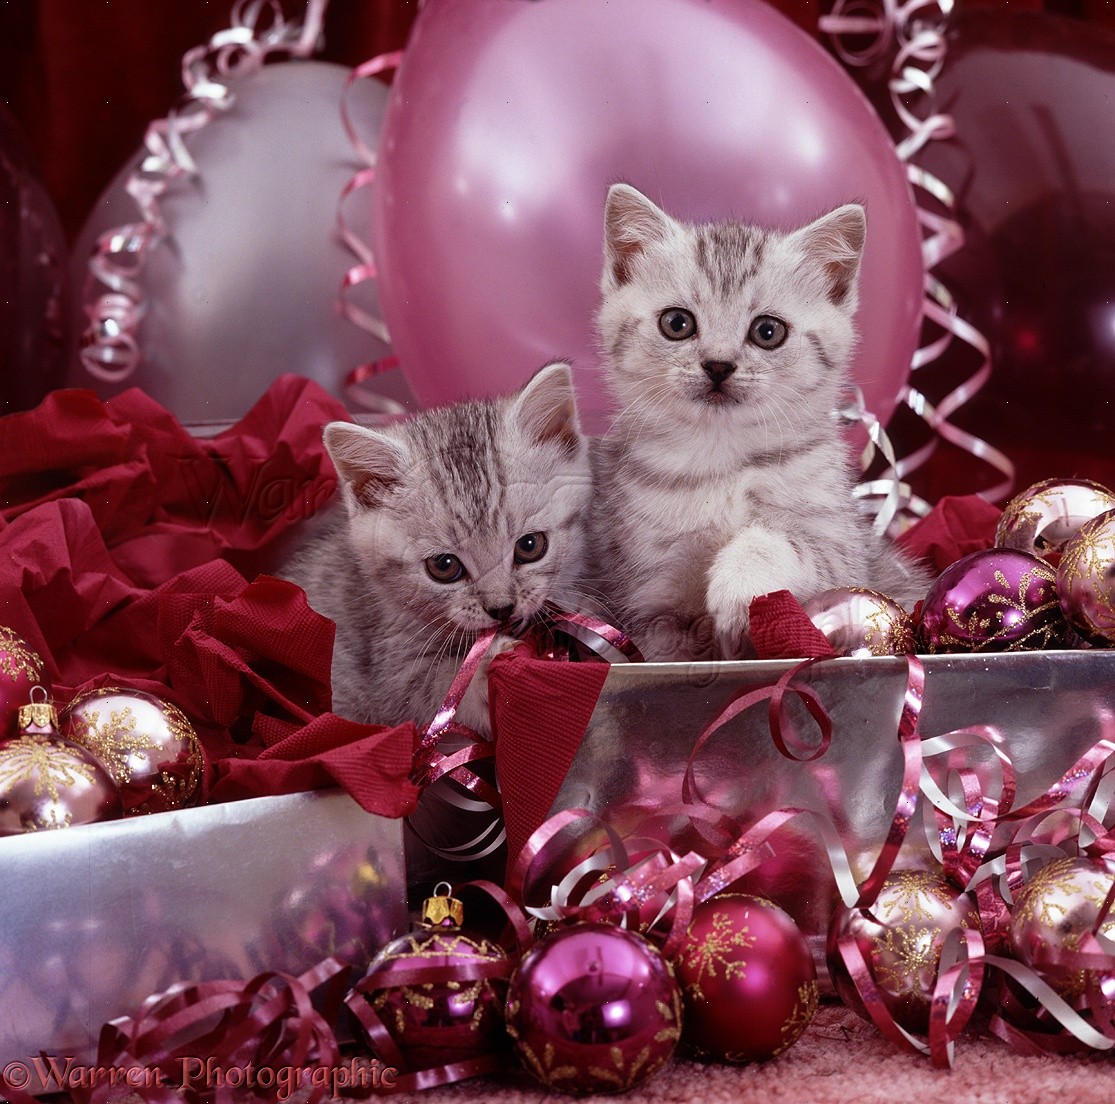 Silver kittens and pink Christmas decorations photo WP08540